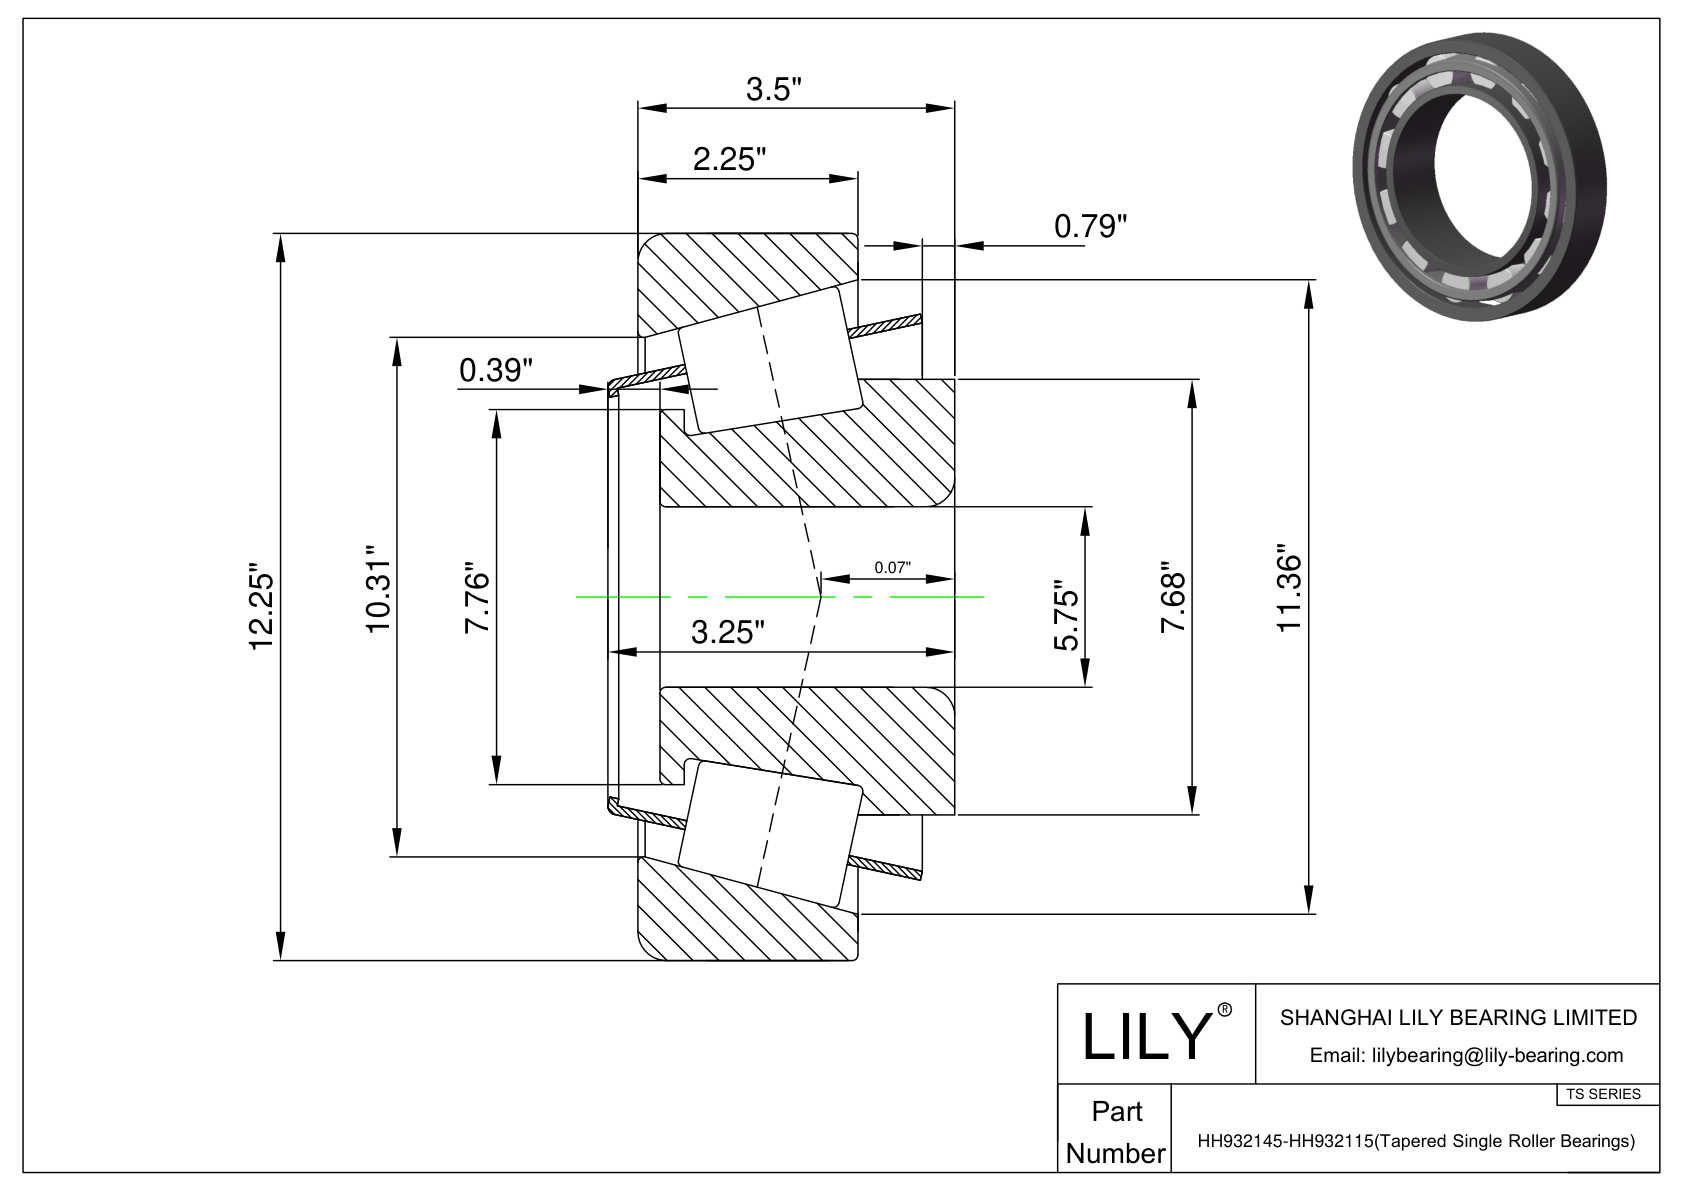 HH932145-HH932115 TS (Tapered Single Roller Bearings) (Imperial) cad drawing